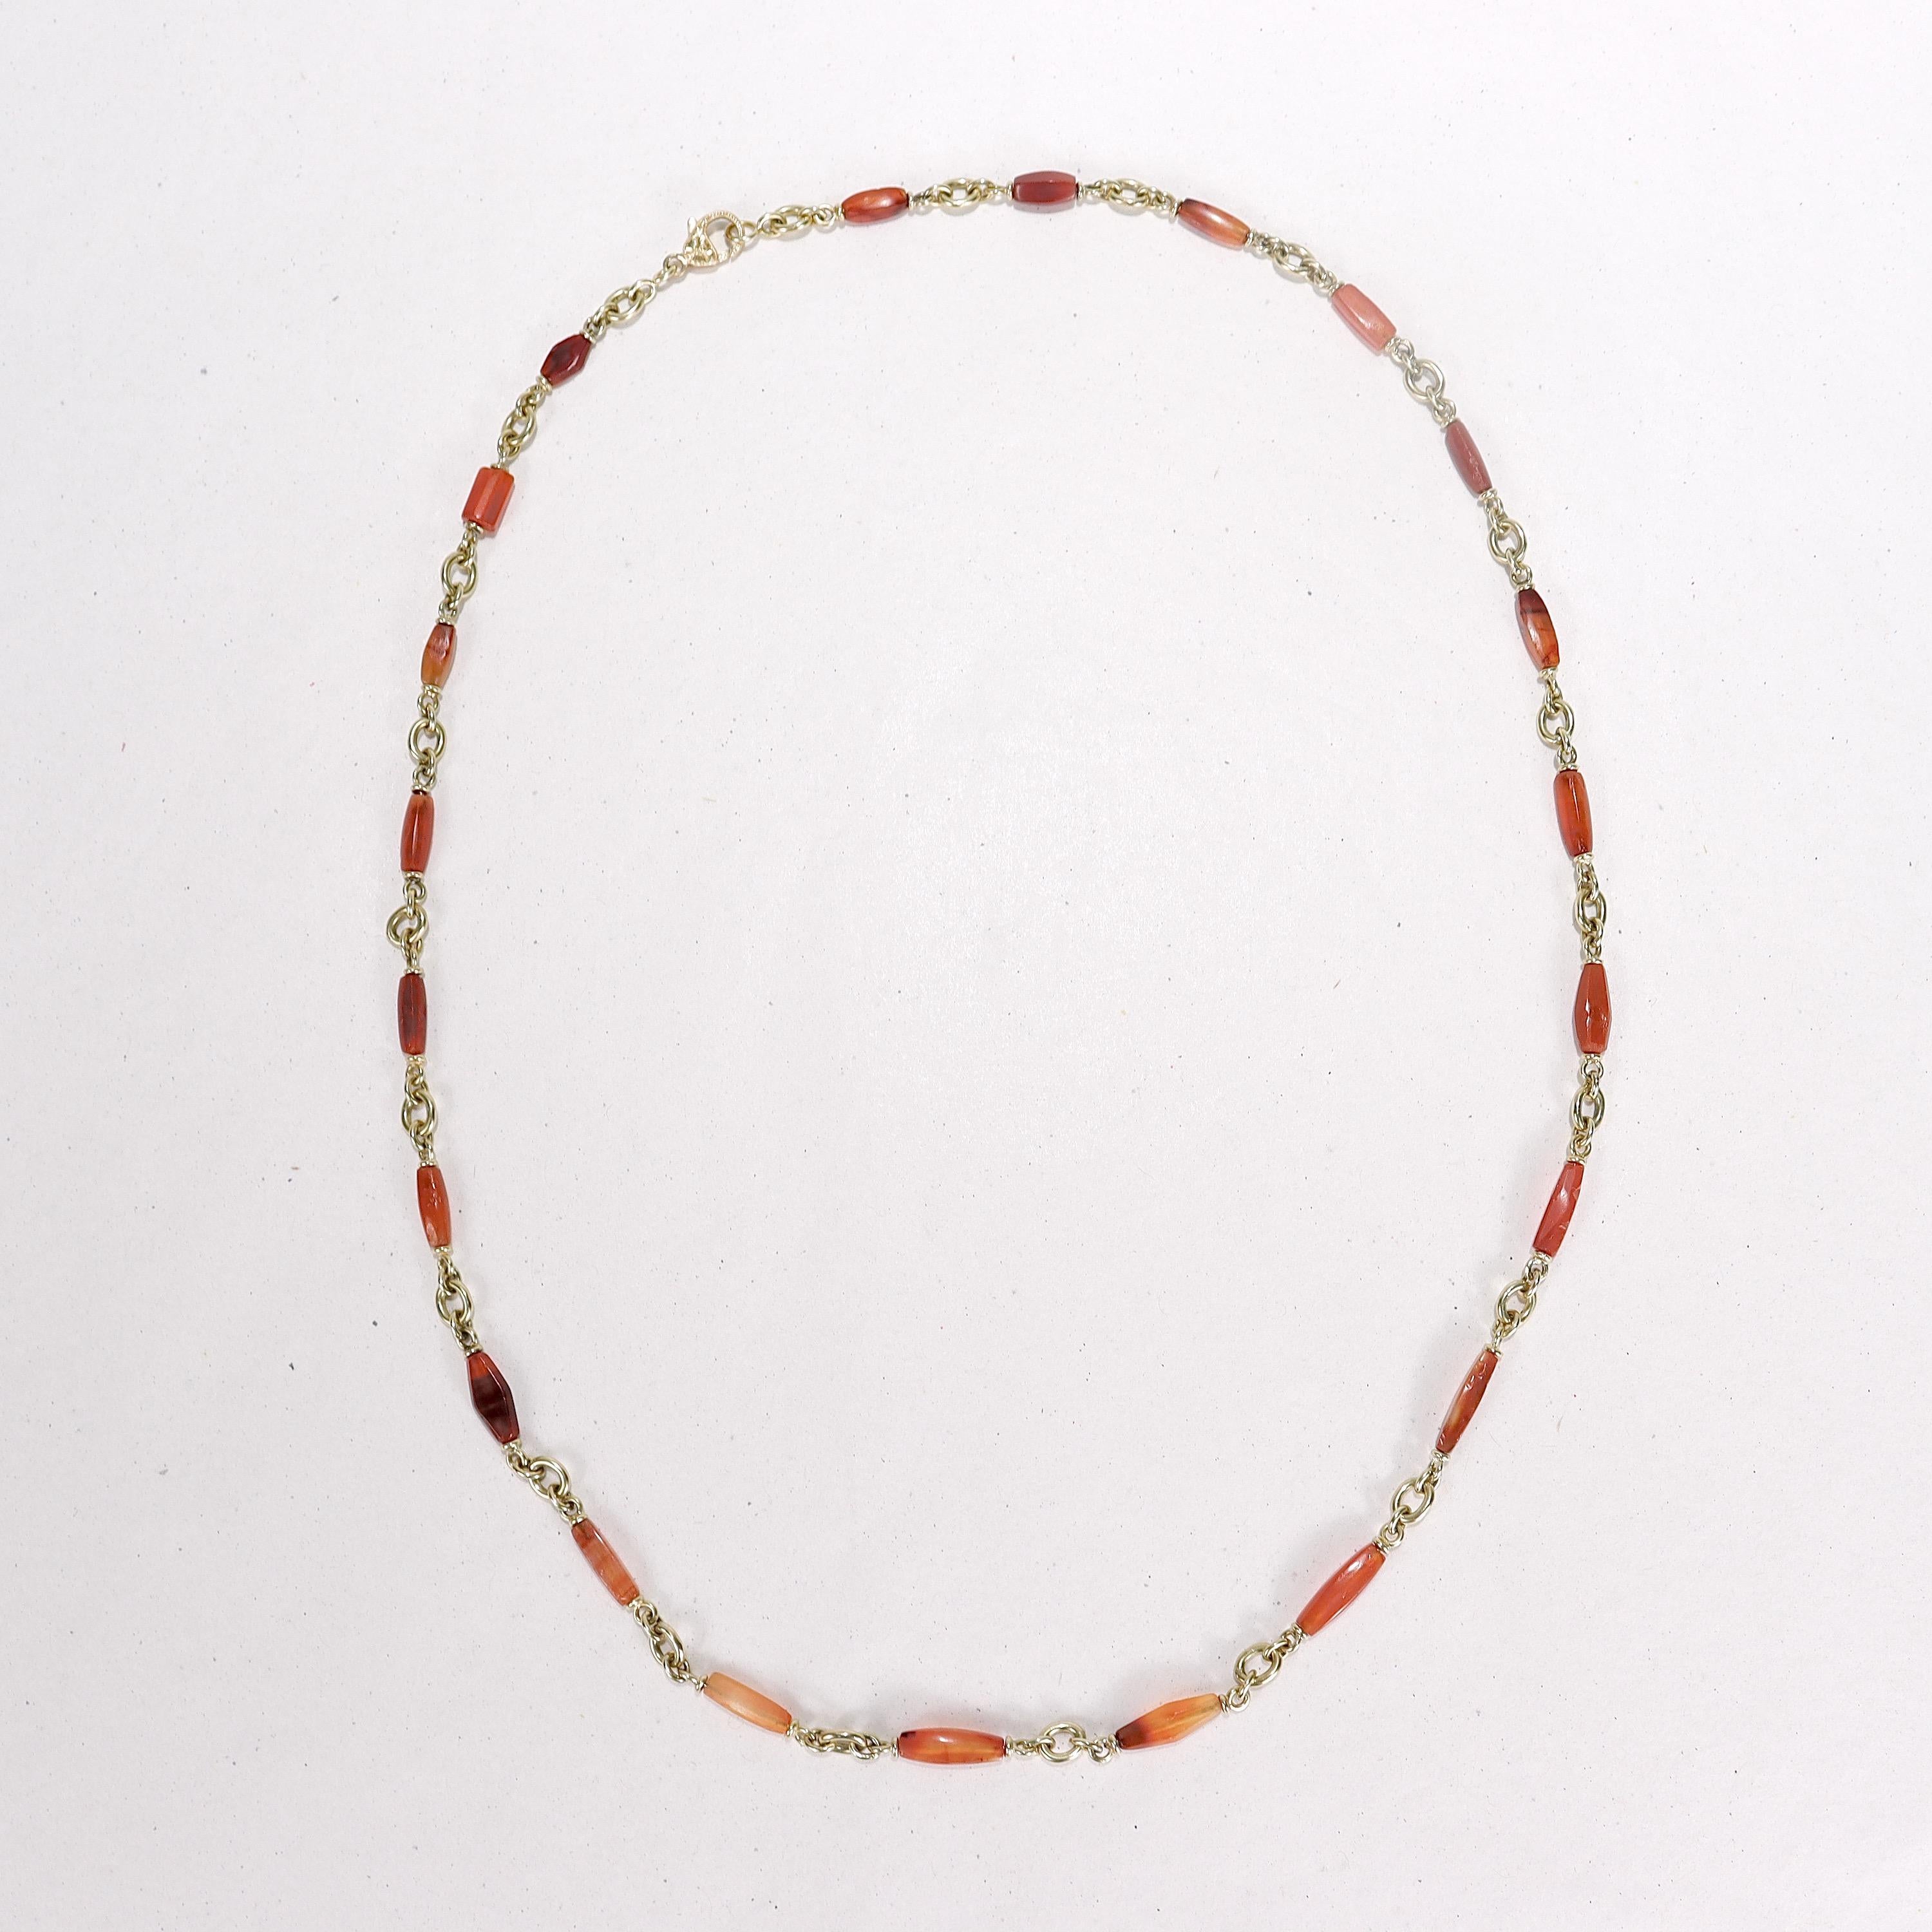 Sylva et Cie 18k Gold & Carnelian Bead Graduated Bullet Chain Necklace In Good Condition For Sale In Philadelphia, PA